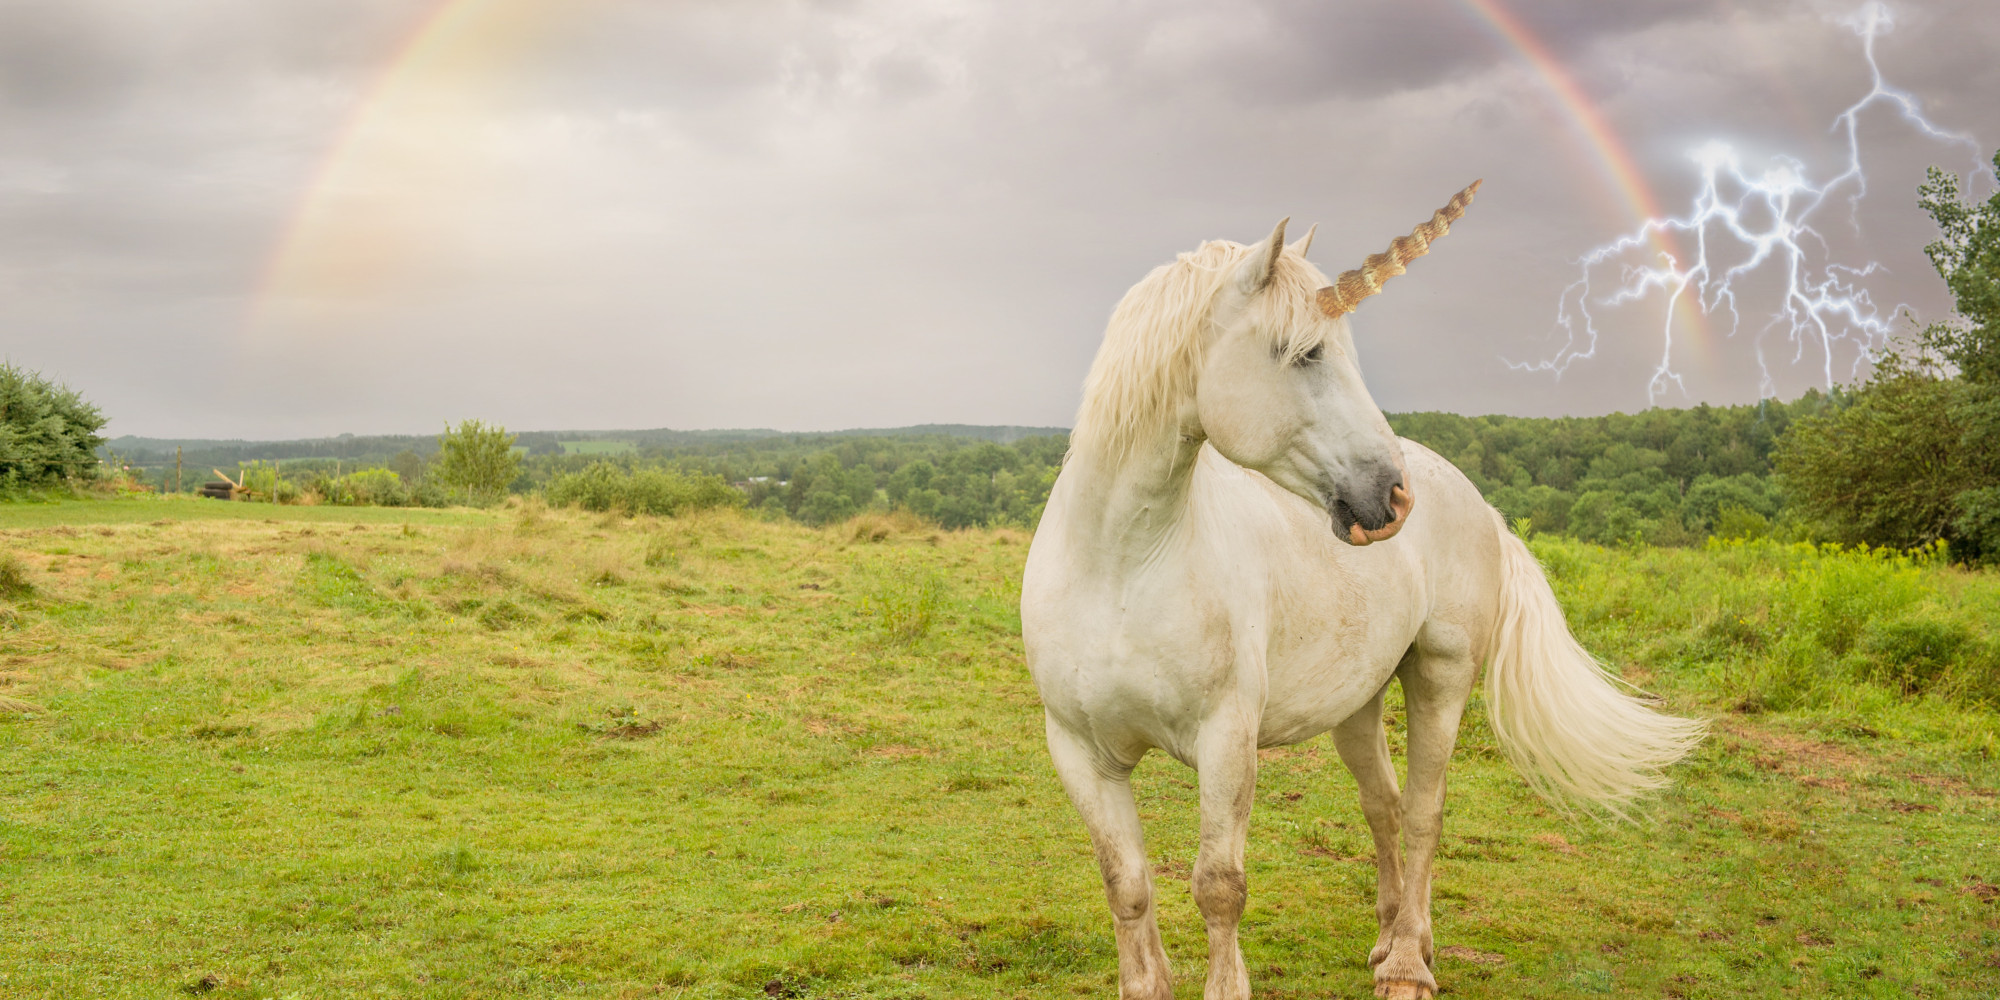 13 Stock Images Of Unicorns That Will Blind You With Majesty | HuffPost